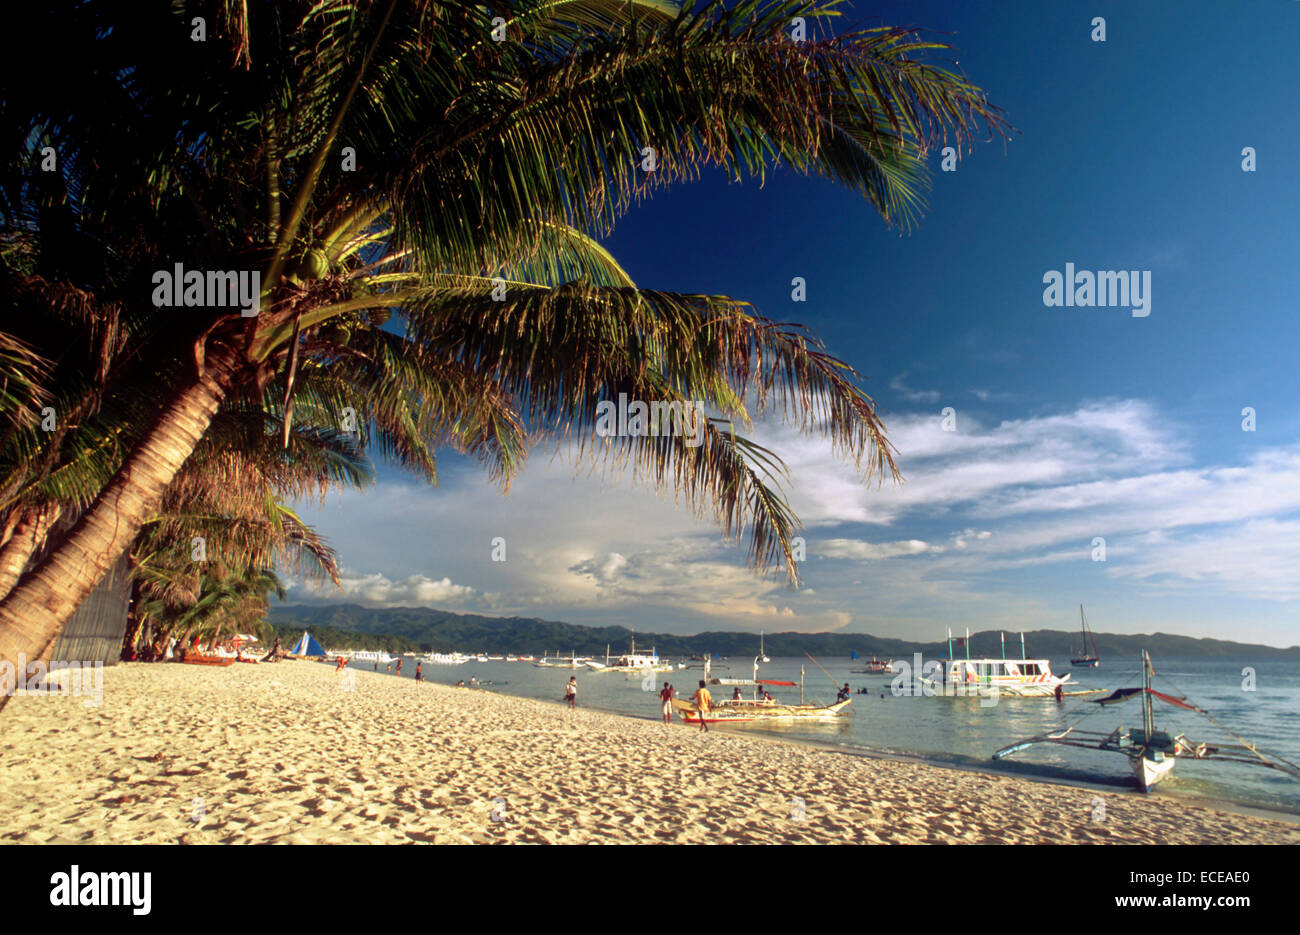 Palms tree. White sand beach. White beach. Boracay. Philippines. Boracay is a small island in the Philippines located approximat Stock Photo